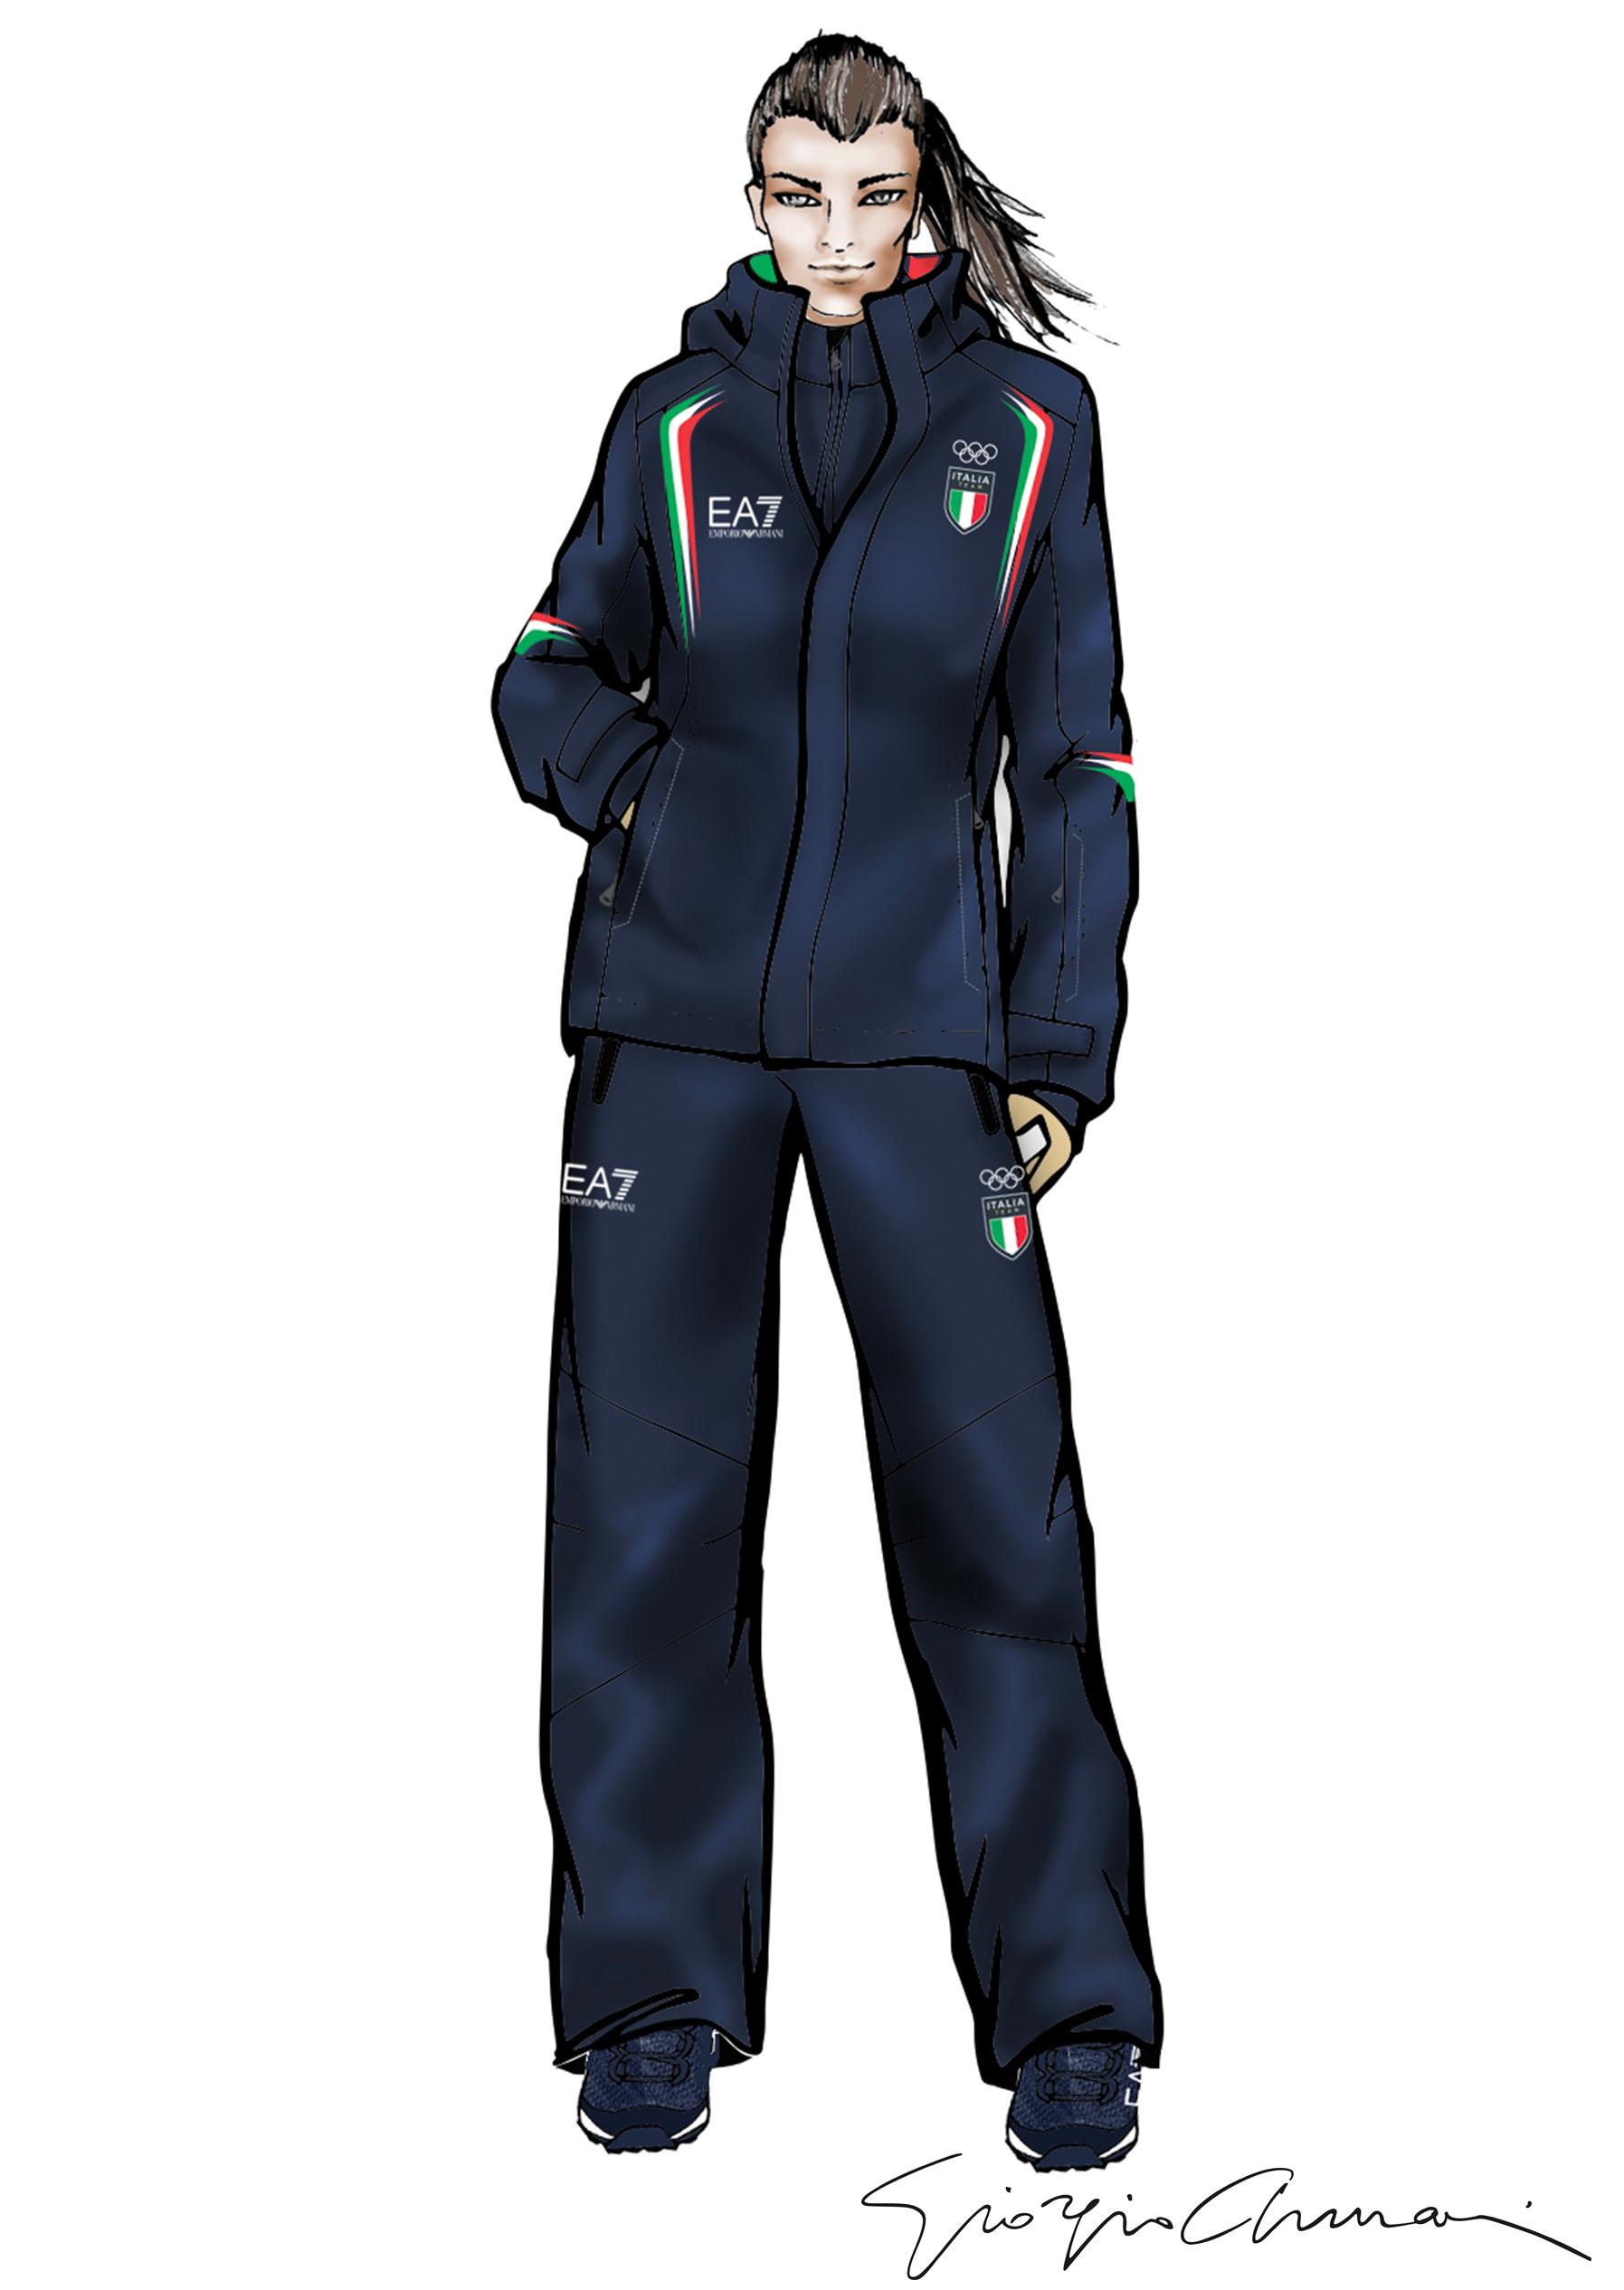 Giorgio Armani Will Outfit the Italian Olympic and Paralympic Teams in 2018  - Daily Front Row